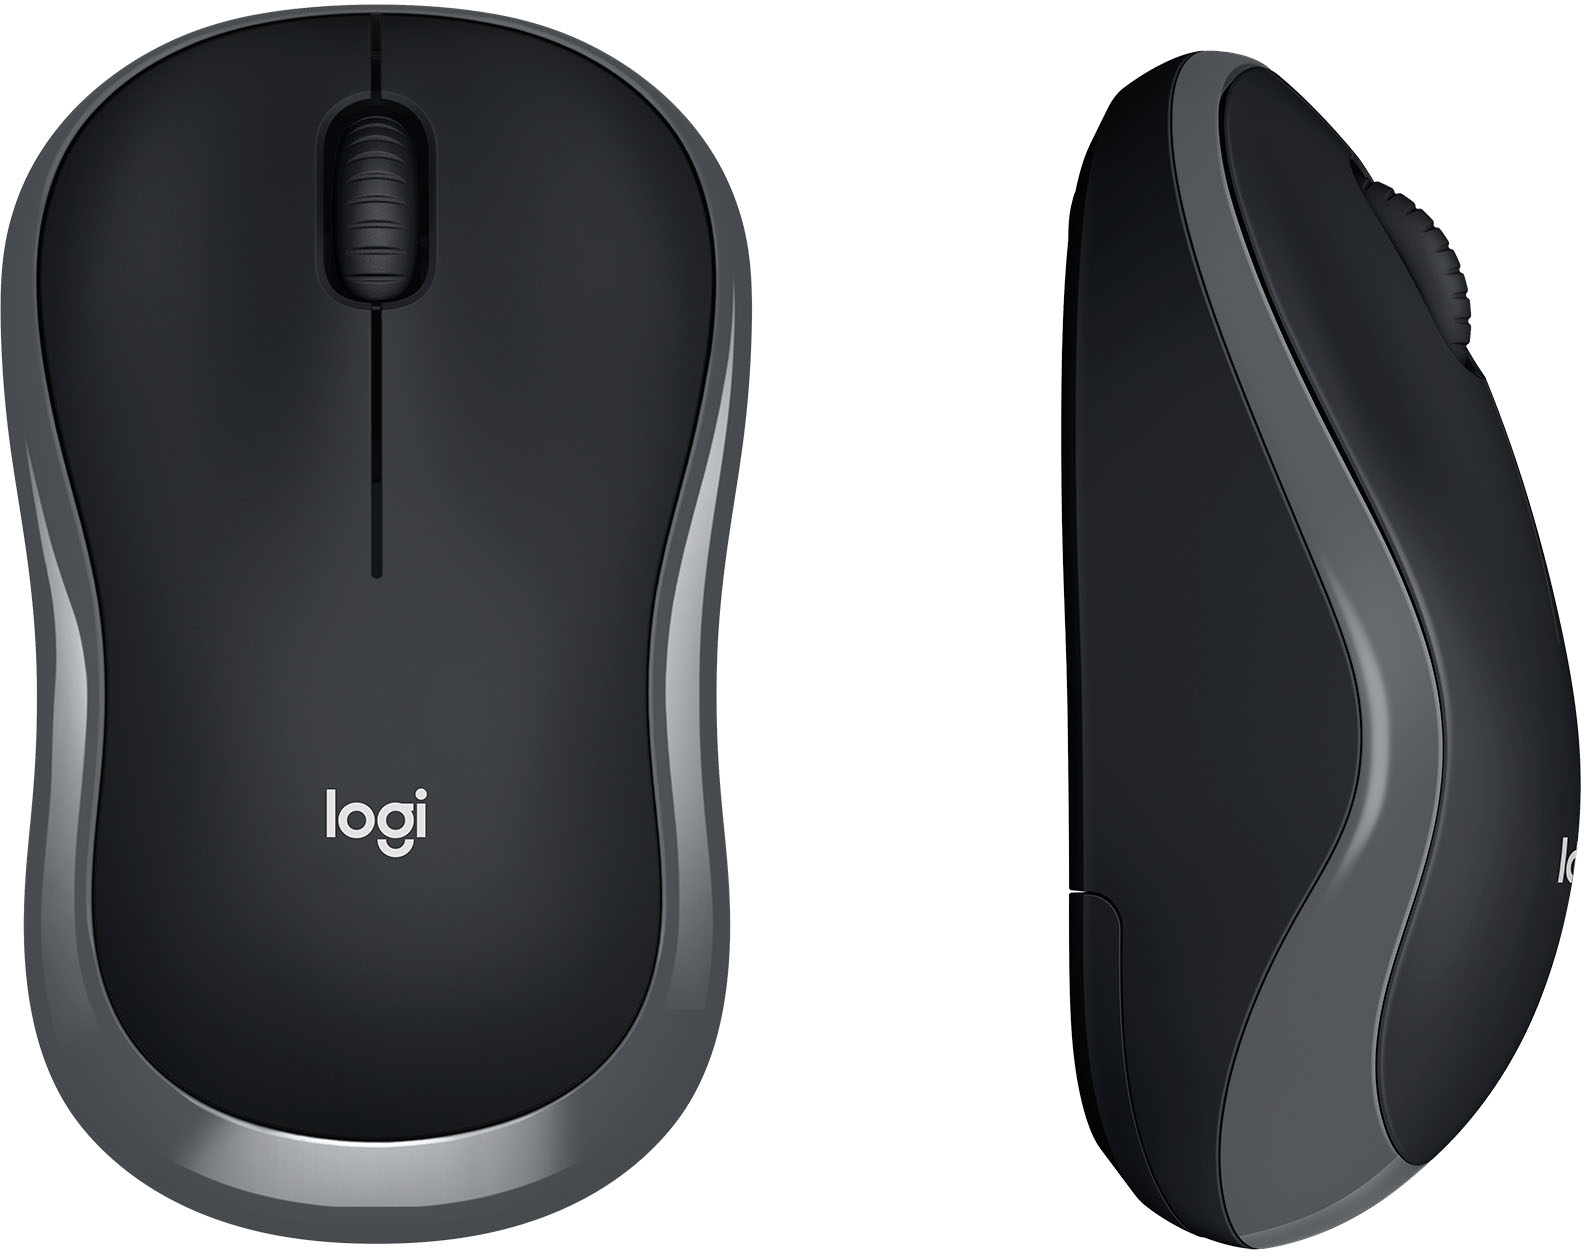 Logitech M185 Plug-and-Play Wireless Mouse Plus Comfort (Black)